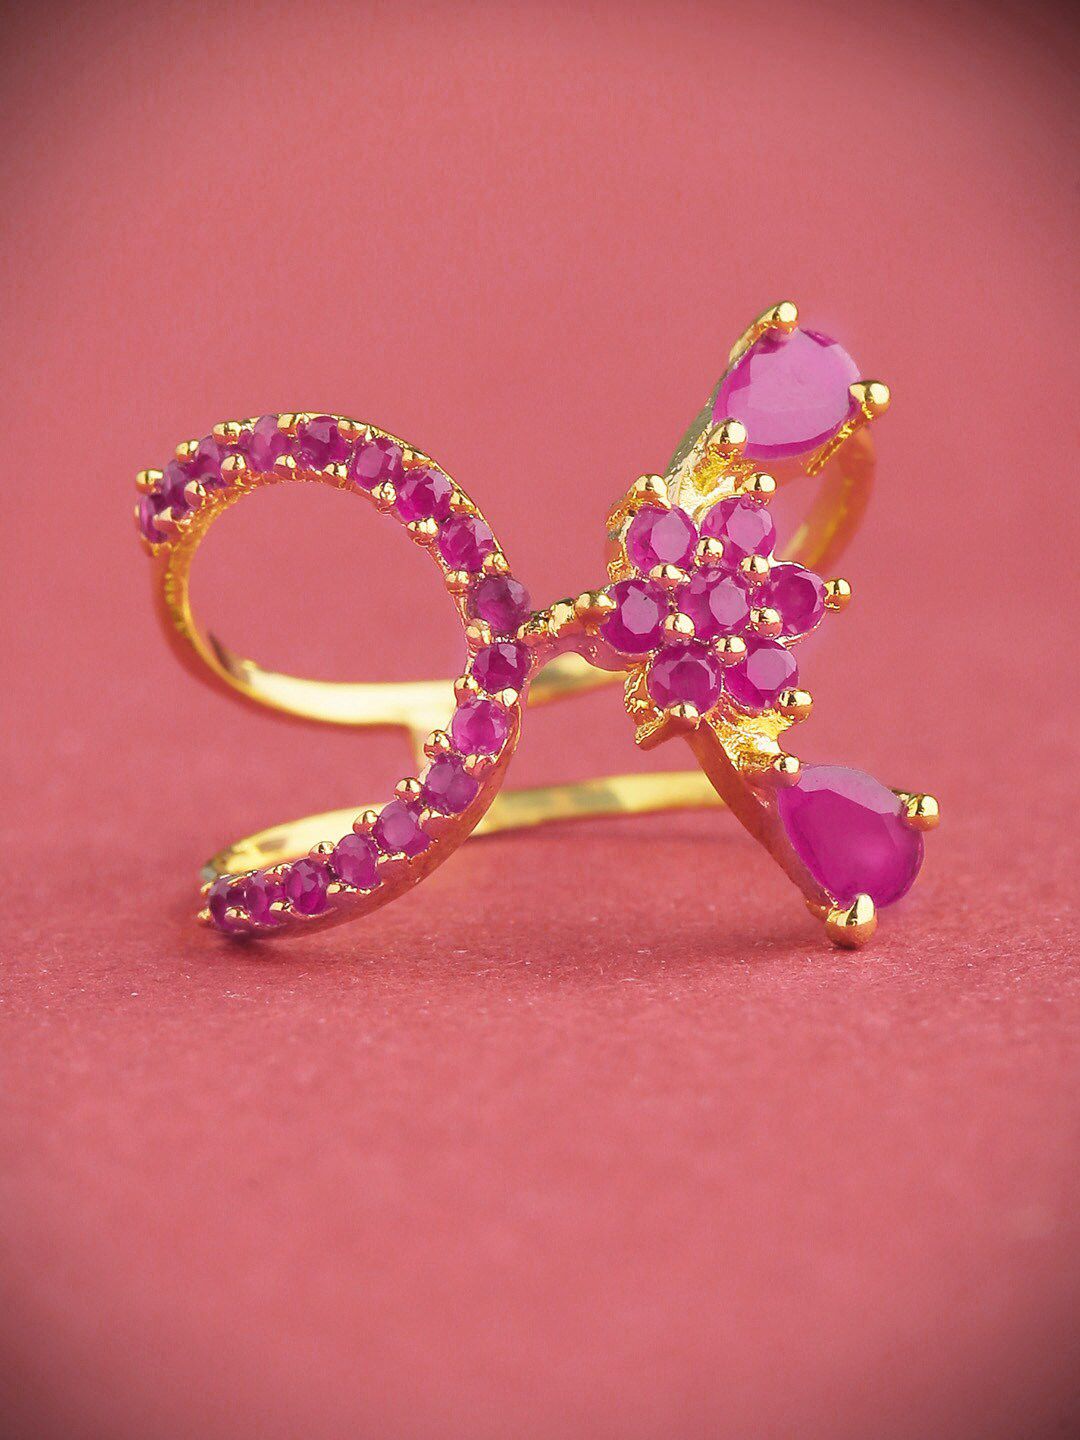 Priyaasi Gold-Plated Magenta Ruby Stone-Studded Finger Ring Price in India